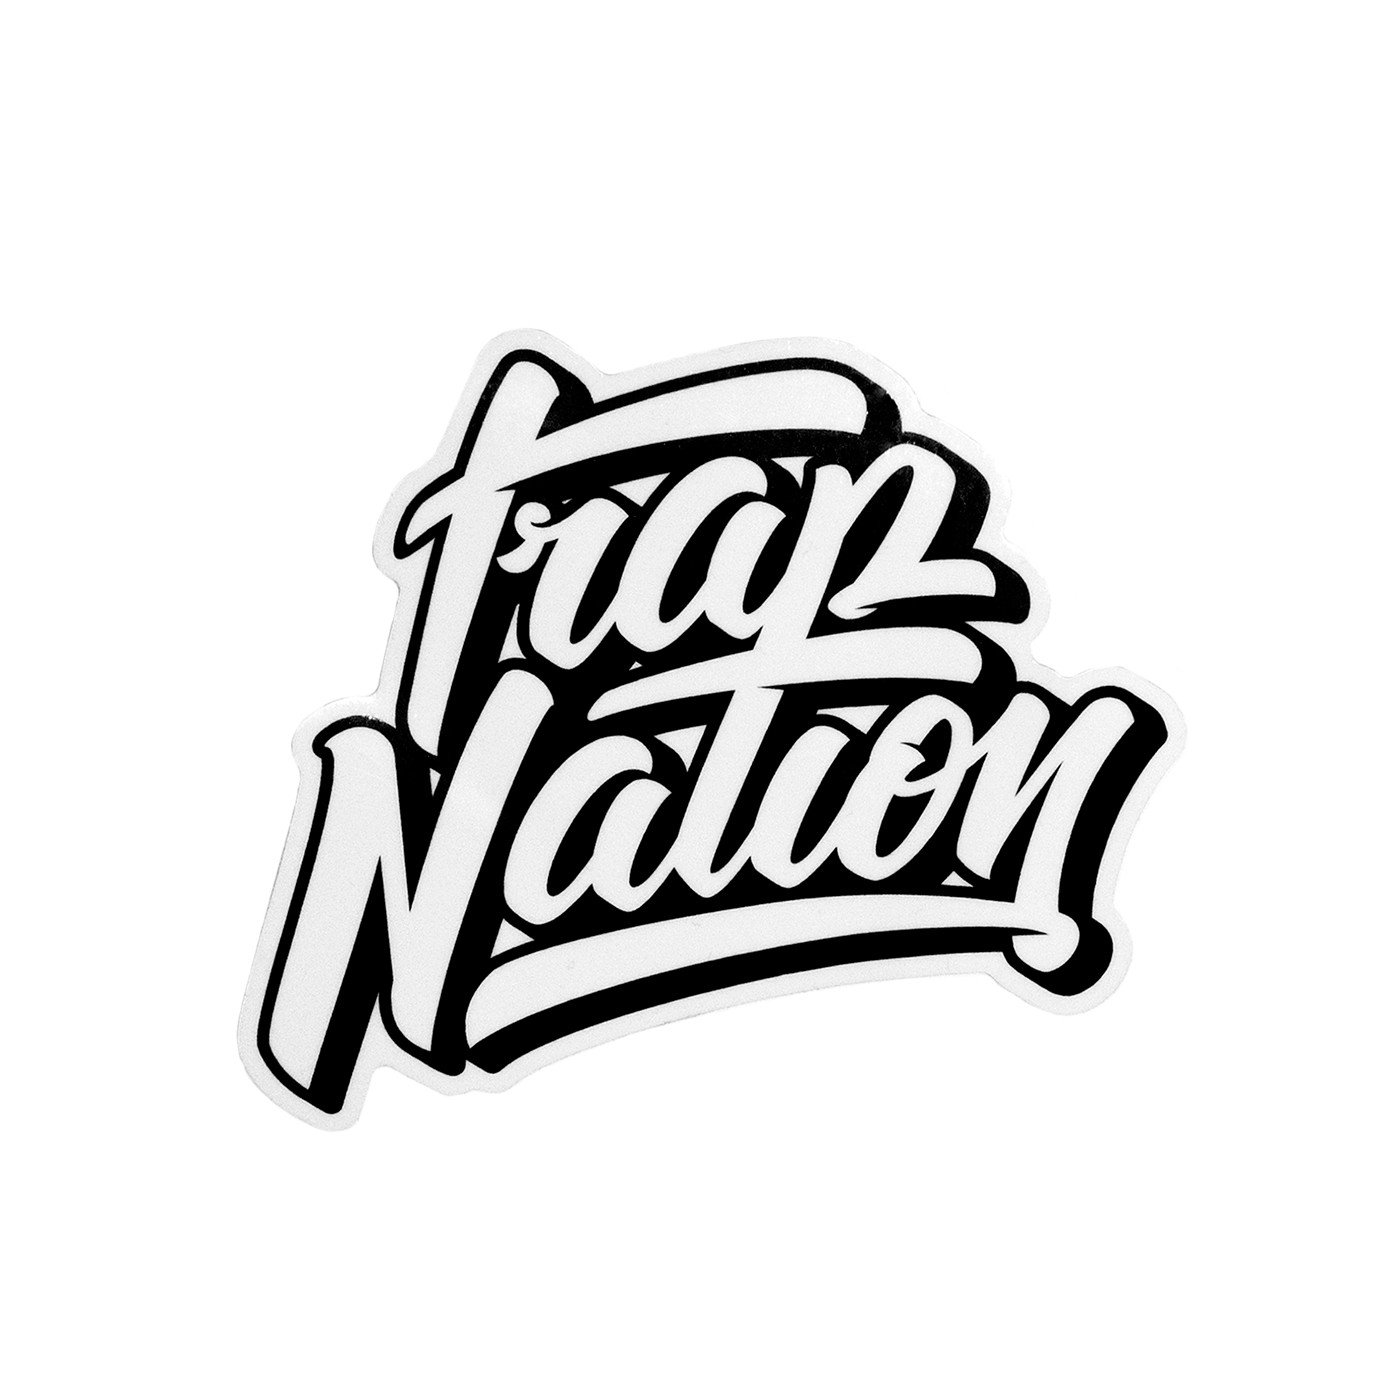 Trap Nation Sticker – The Nations